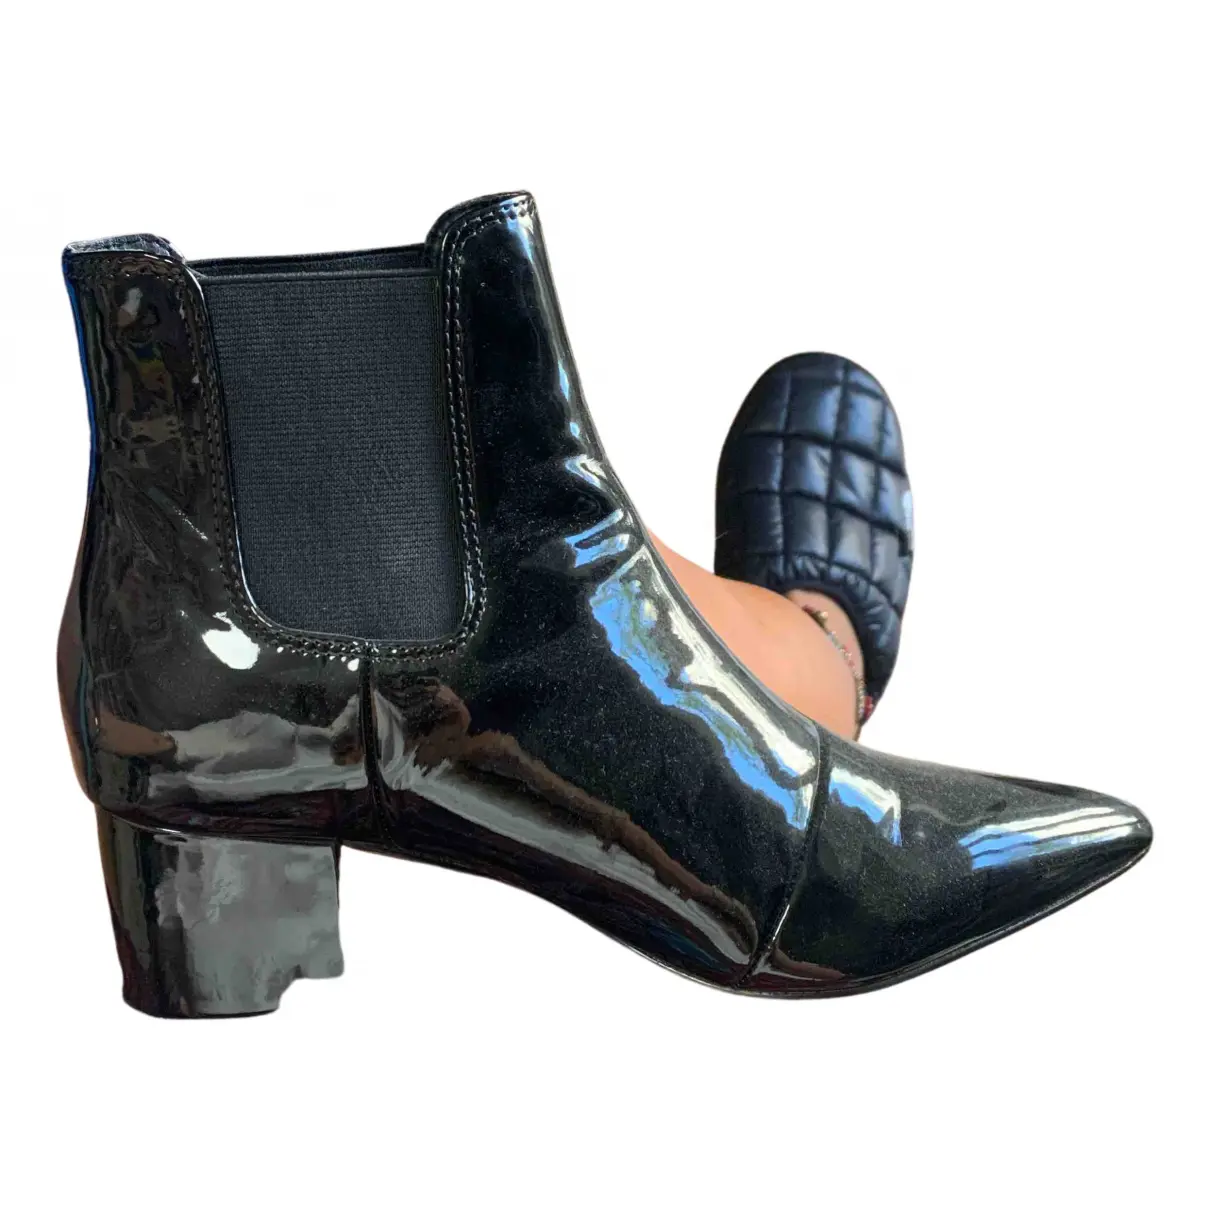 Buy Steve Madden Patent leather ankle boots online